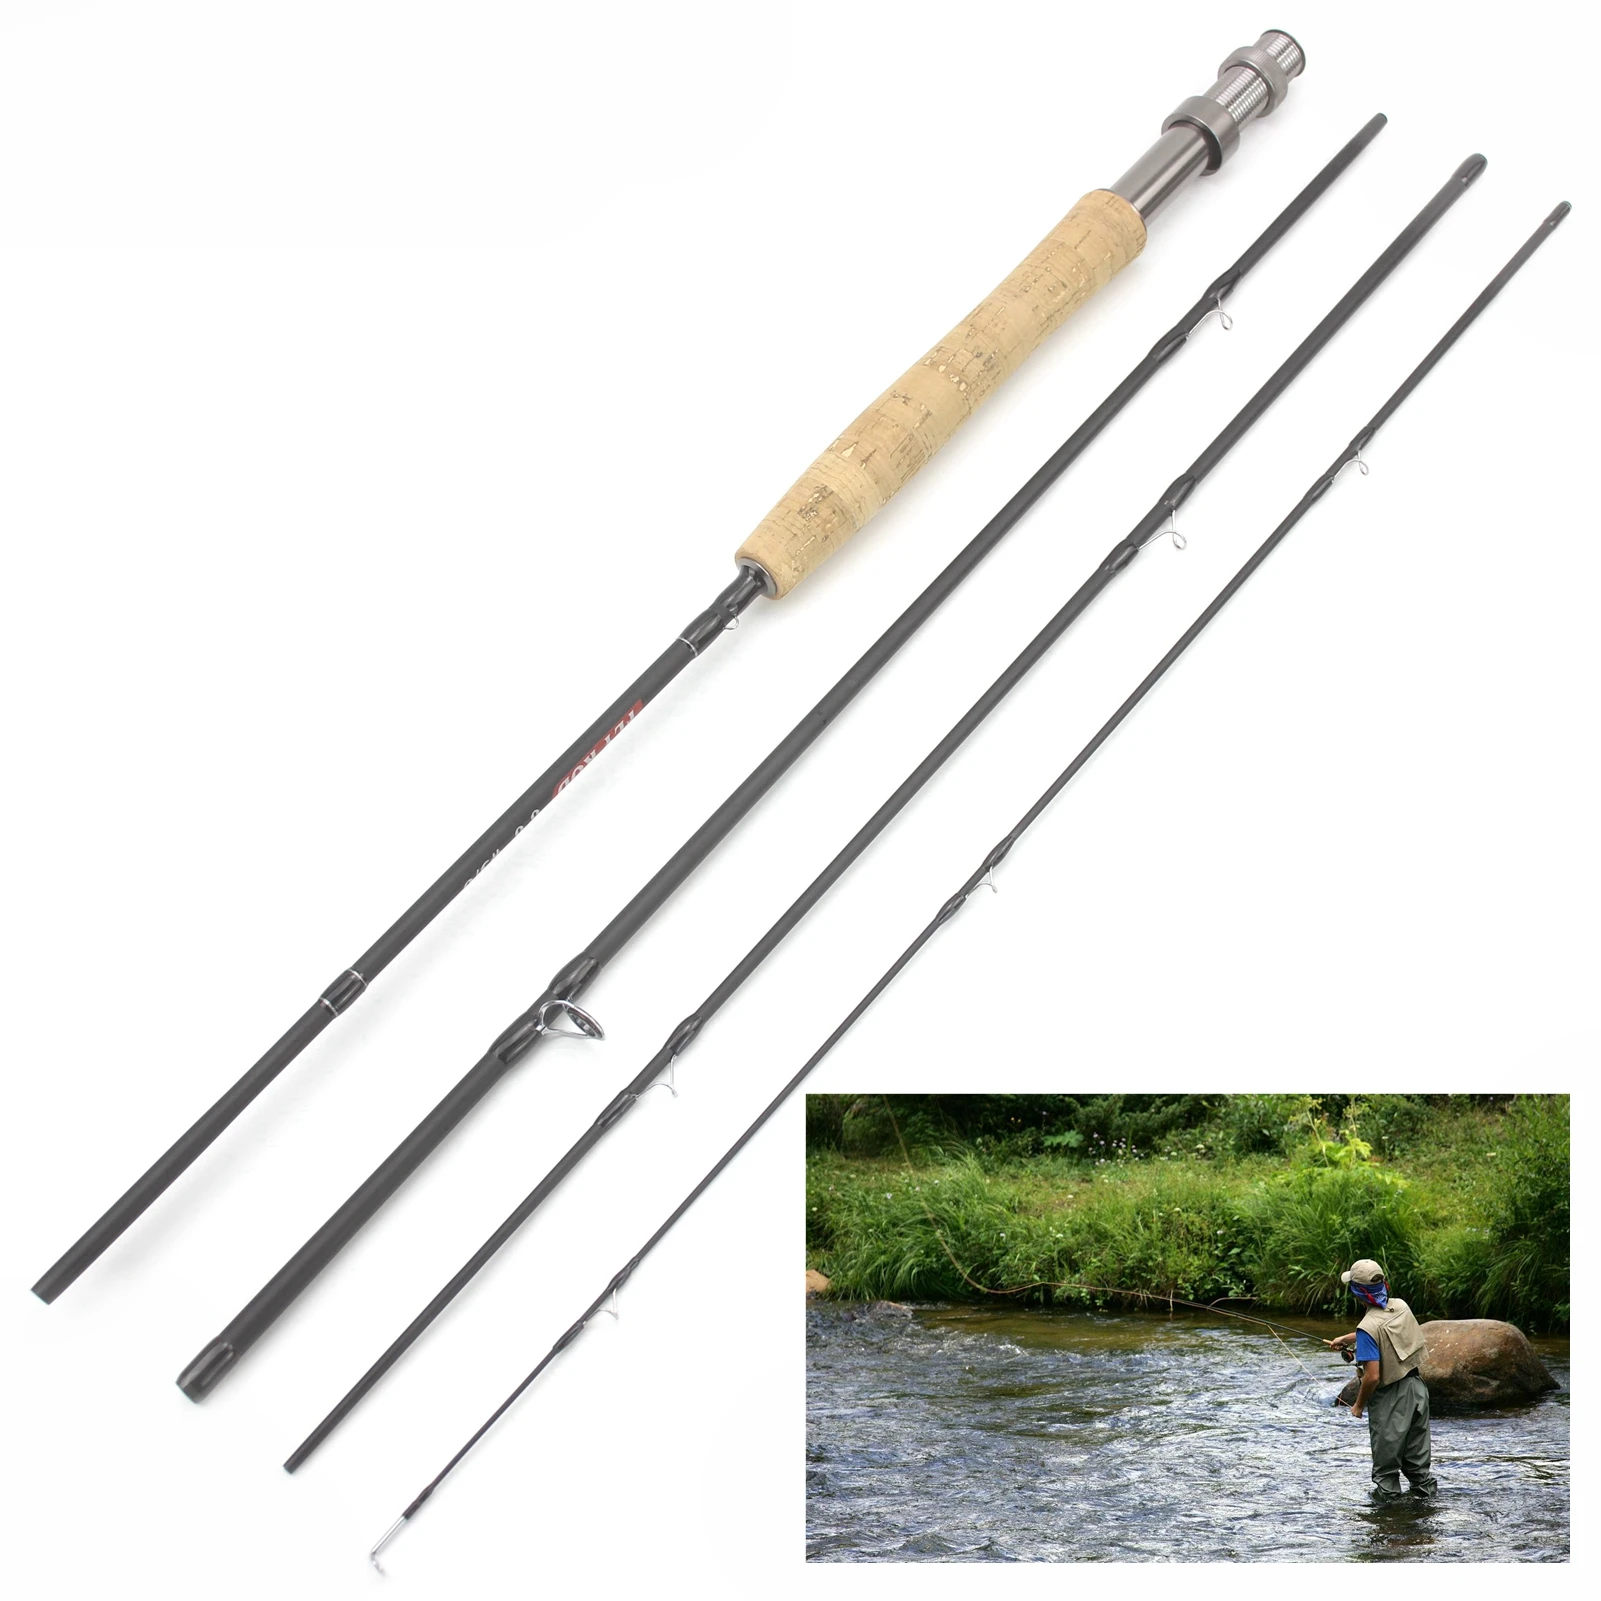 NEW 2.1M 7FT Fly Fishing Rod King Fisher Carbon Fiber Ultralight Weight Fly Fishing  Rod Lake River Fly Rod Goods for fishing